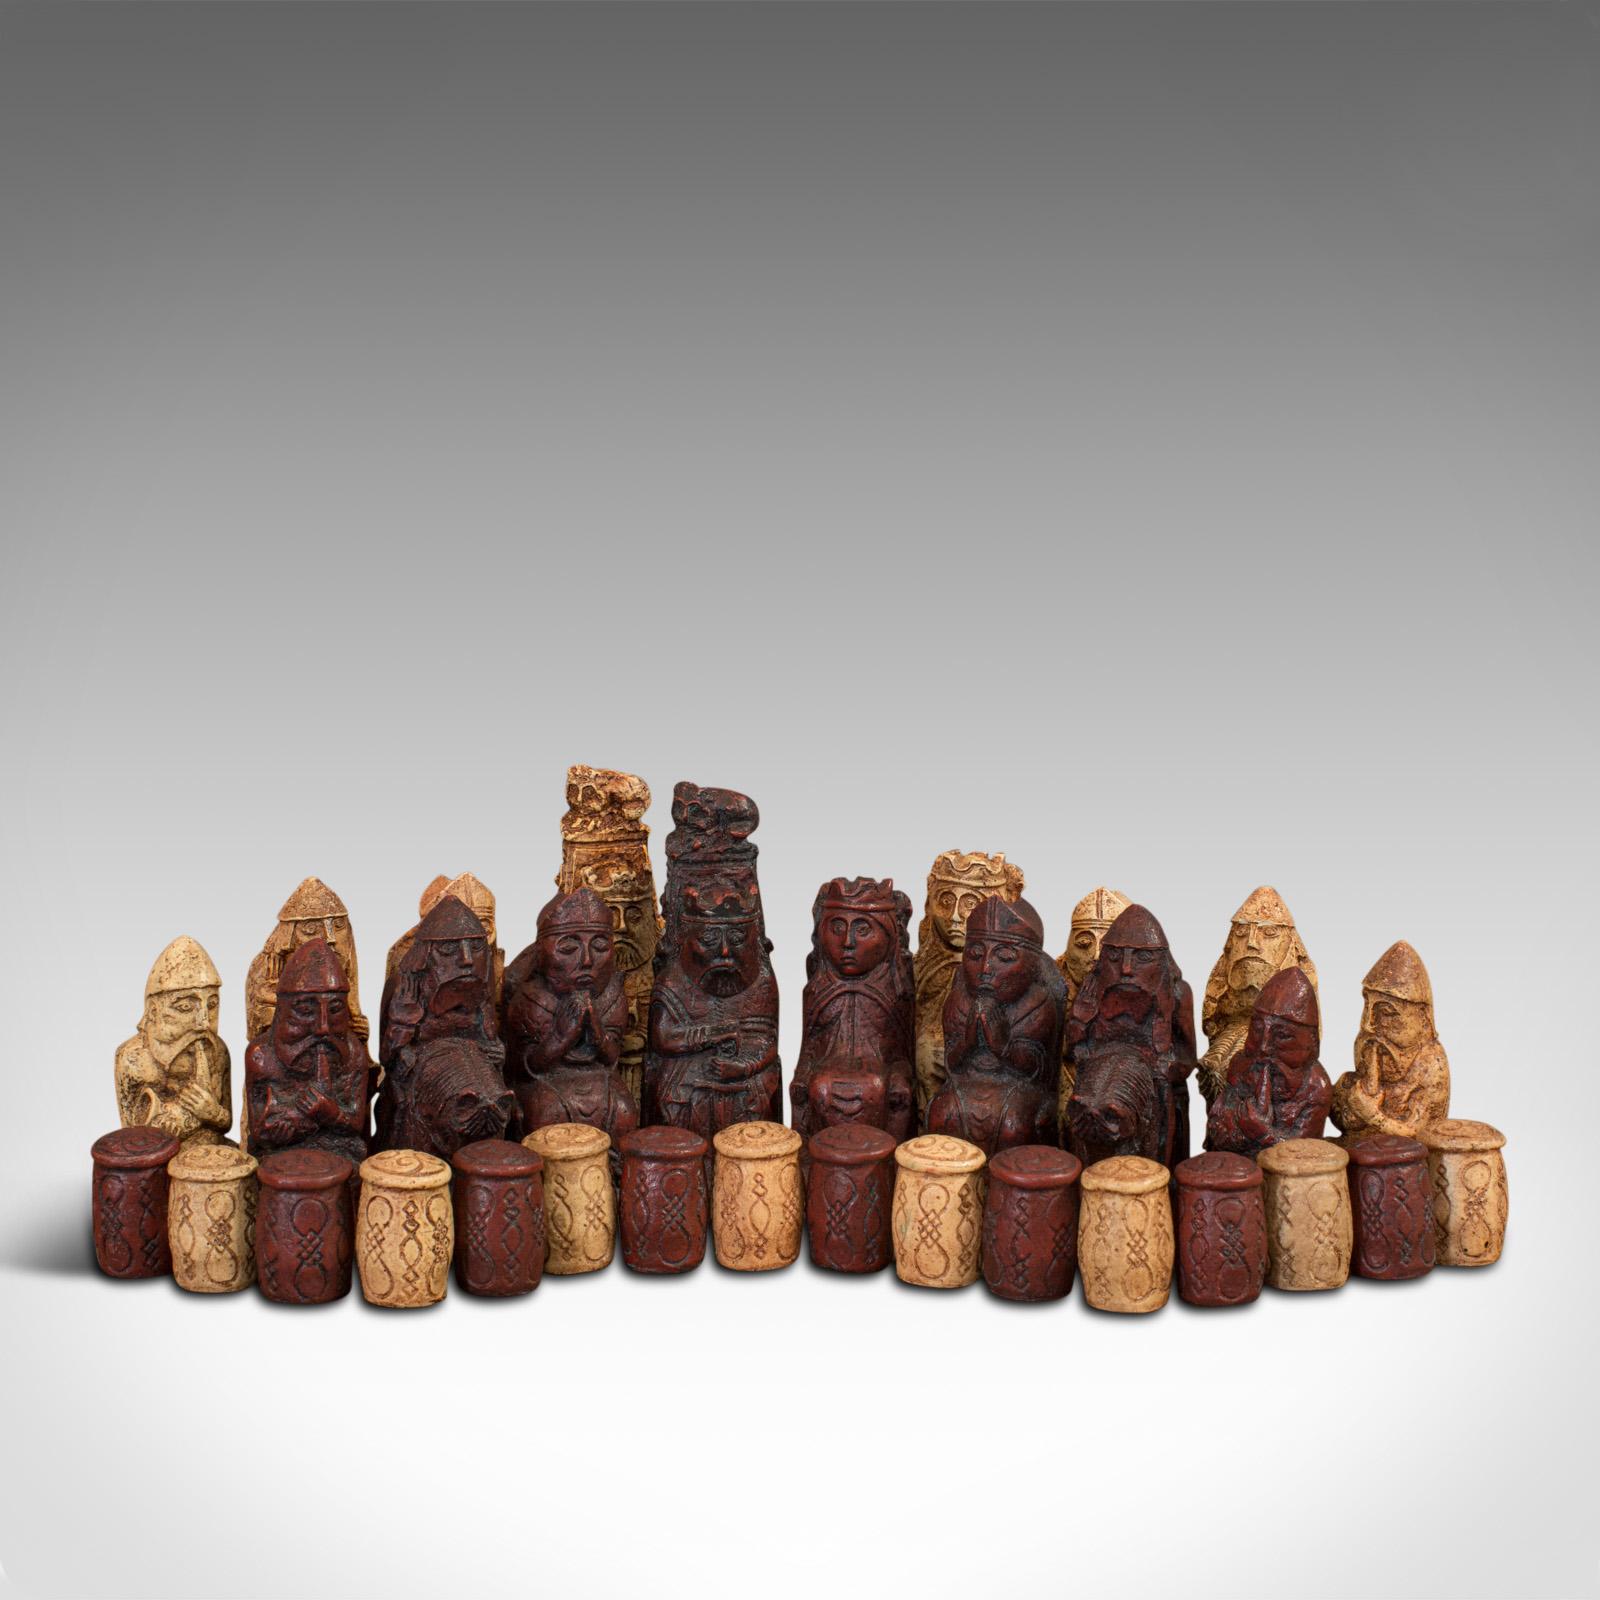 This is a vintage chess set. An English, stone resin gaming set of chess pieces in Gothic taste, dating to the late 20th century, circa 1990.

Appealing medieval-style chess set
Displays a desirable aged patina
Stone resin in good